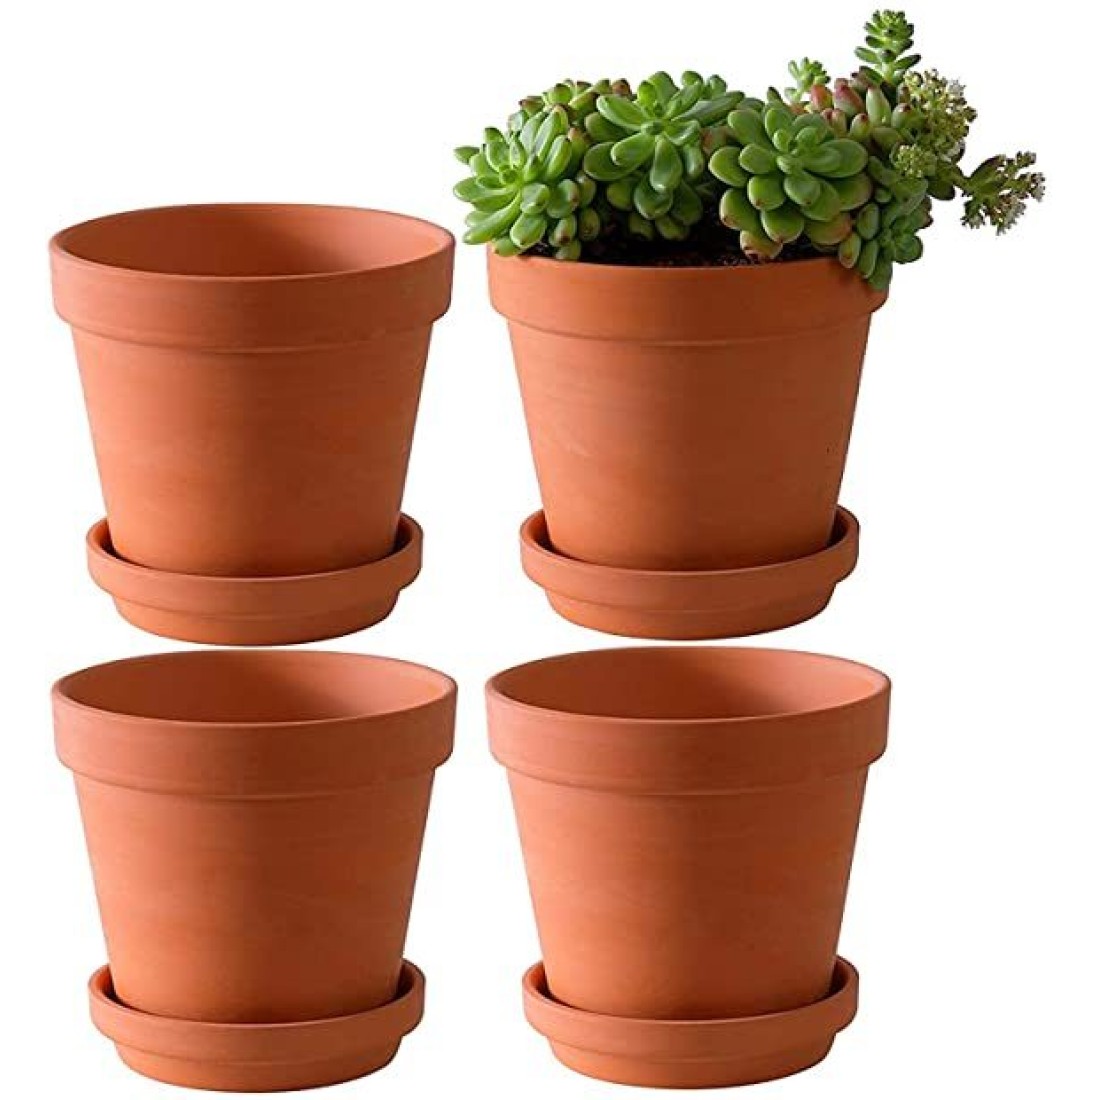 Terracotta clay Pots/Planter 6” inch Size with Saucer( Pack of 4 pots) 1